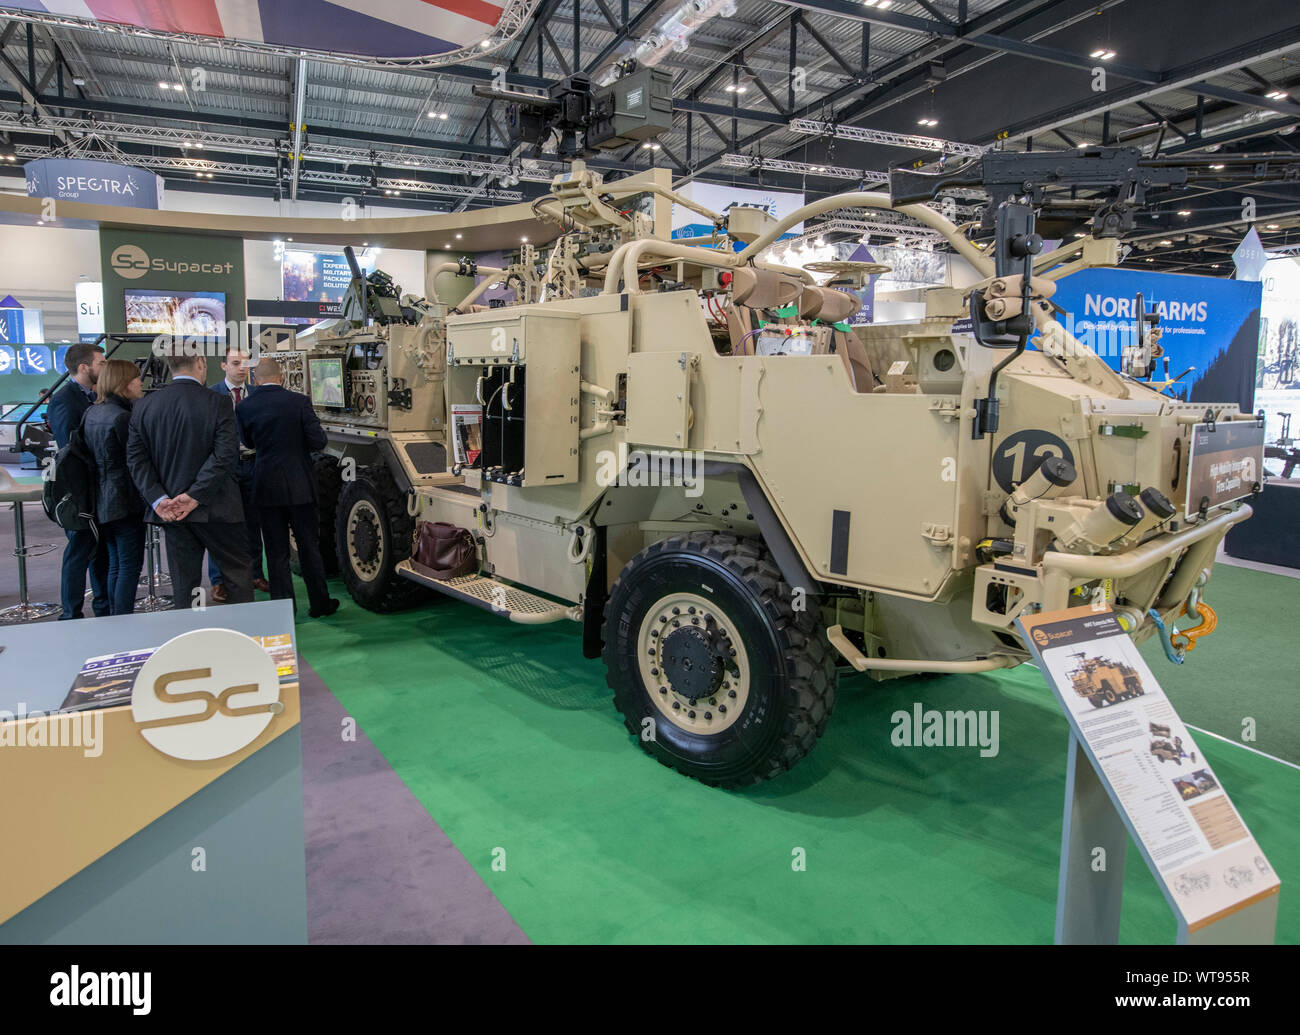 ExCel, London, UK. 11th September 2019. Defence & Security Equipment International (DSEI) event runs from 10th-13th September with over 1600 worldwide exhibitors and more than 35,000 attendees expected, the world’s biggest arms fair. Credit: Malcolm Park/Alamy Live News. Stock Photo